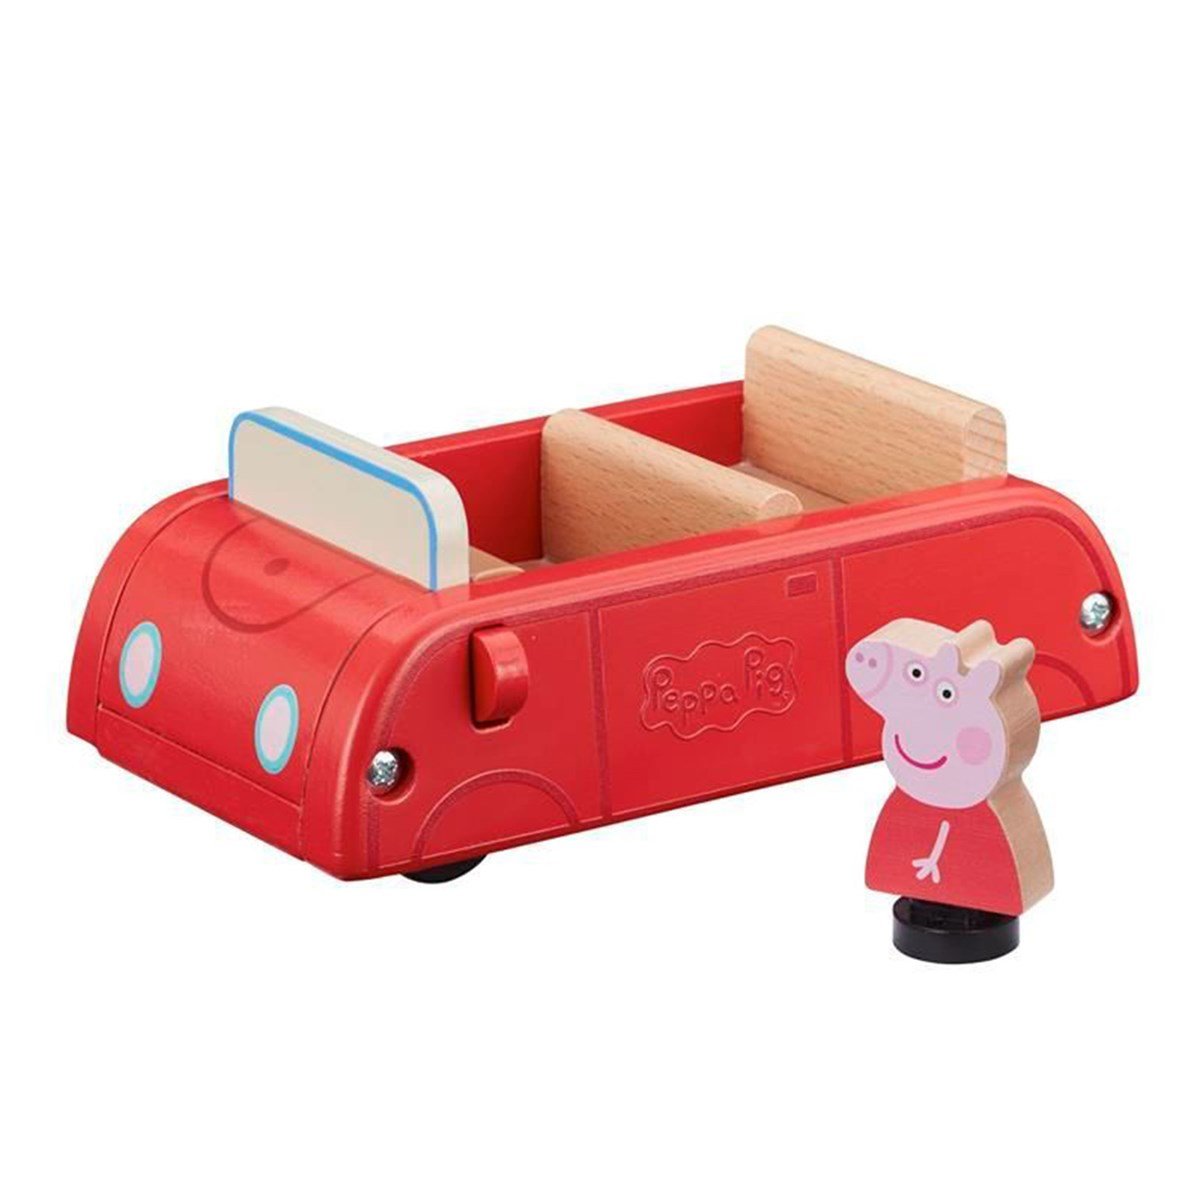 PEPPAS WOOD PLAY FAMILY CAR AND FIGURE